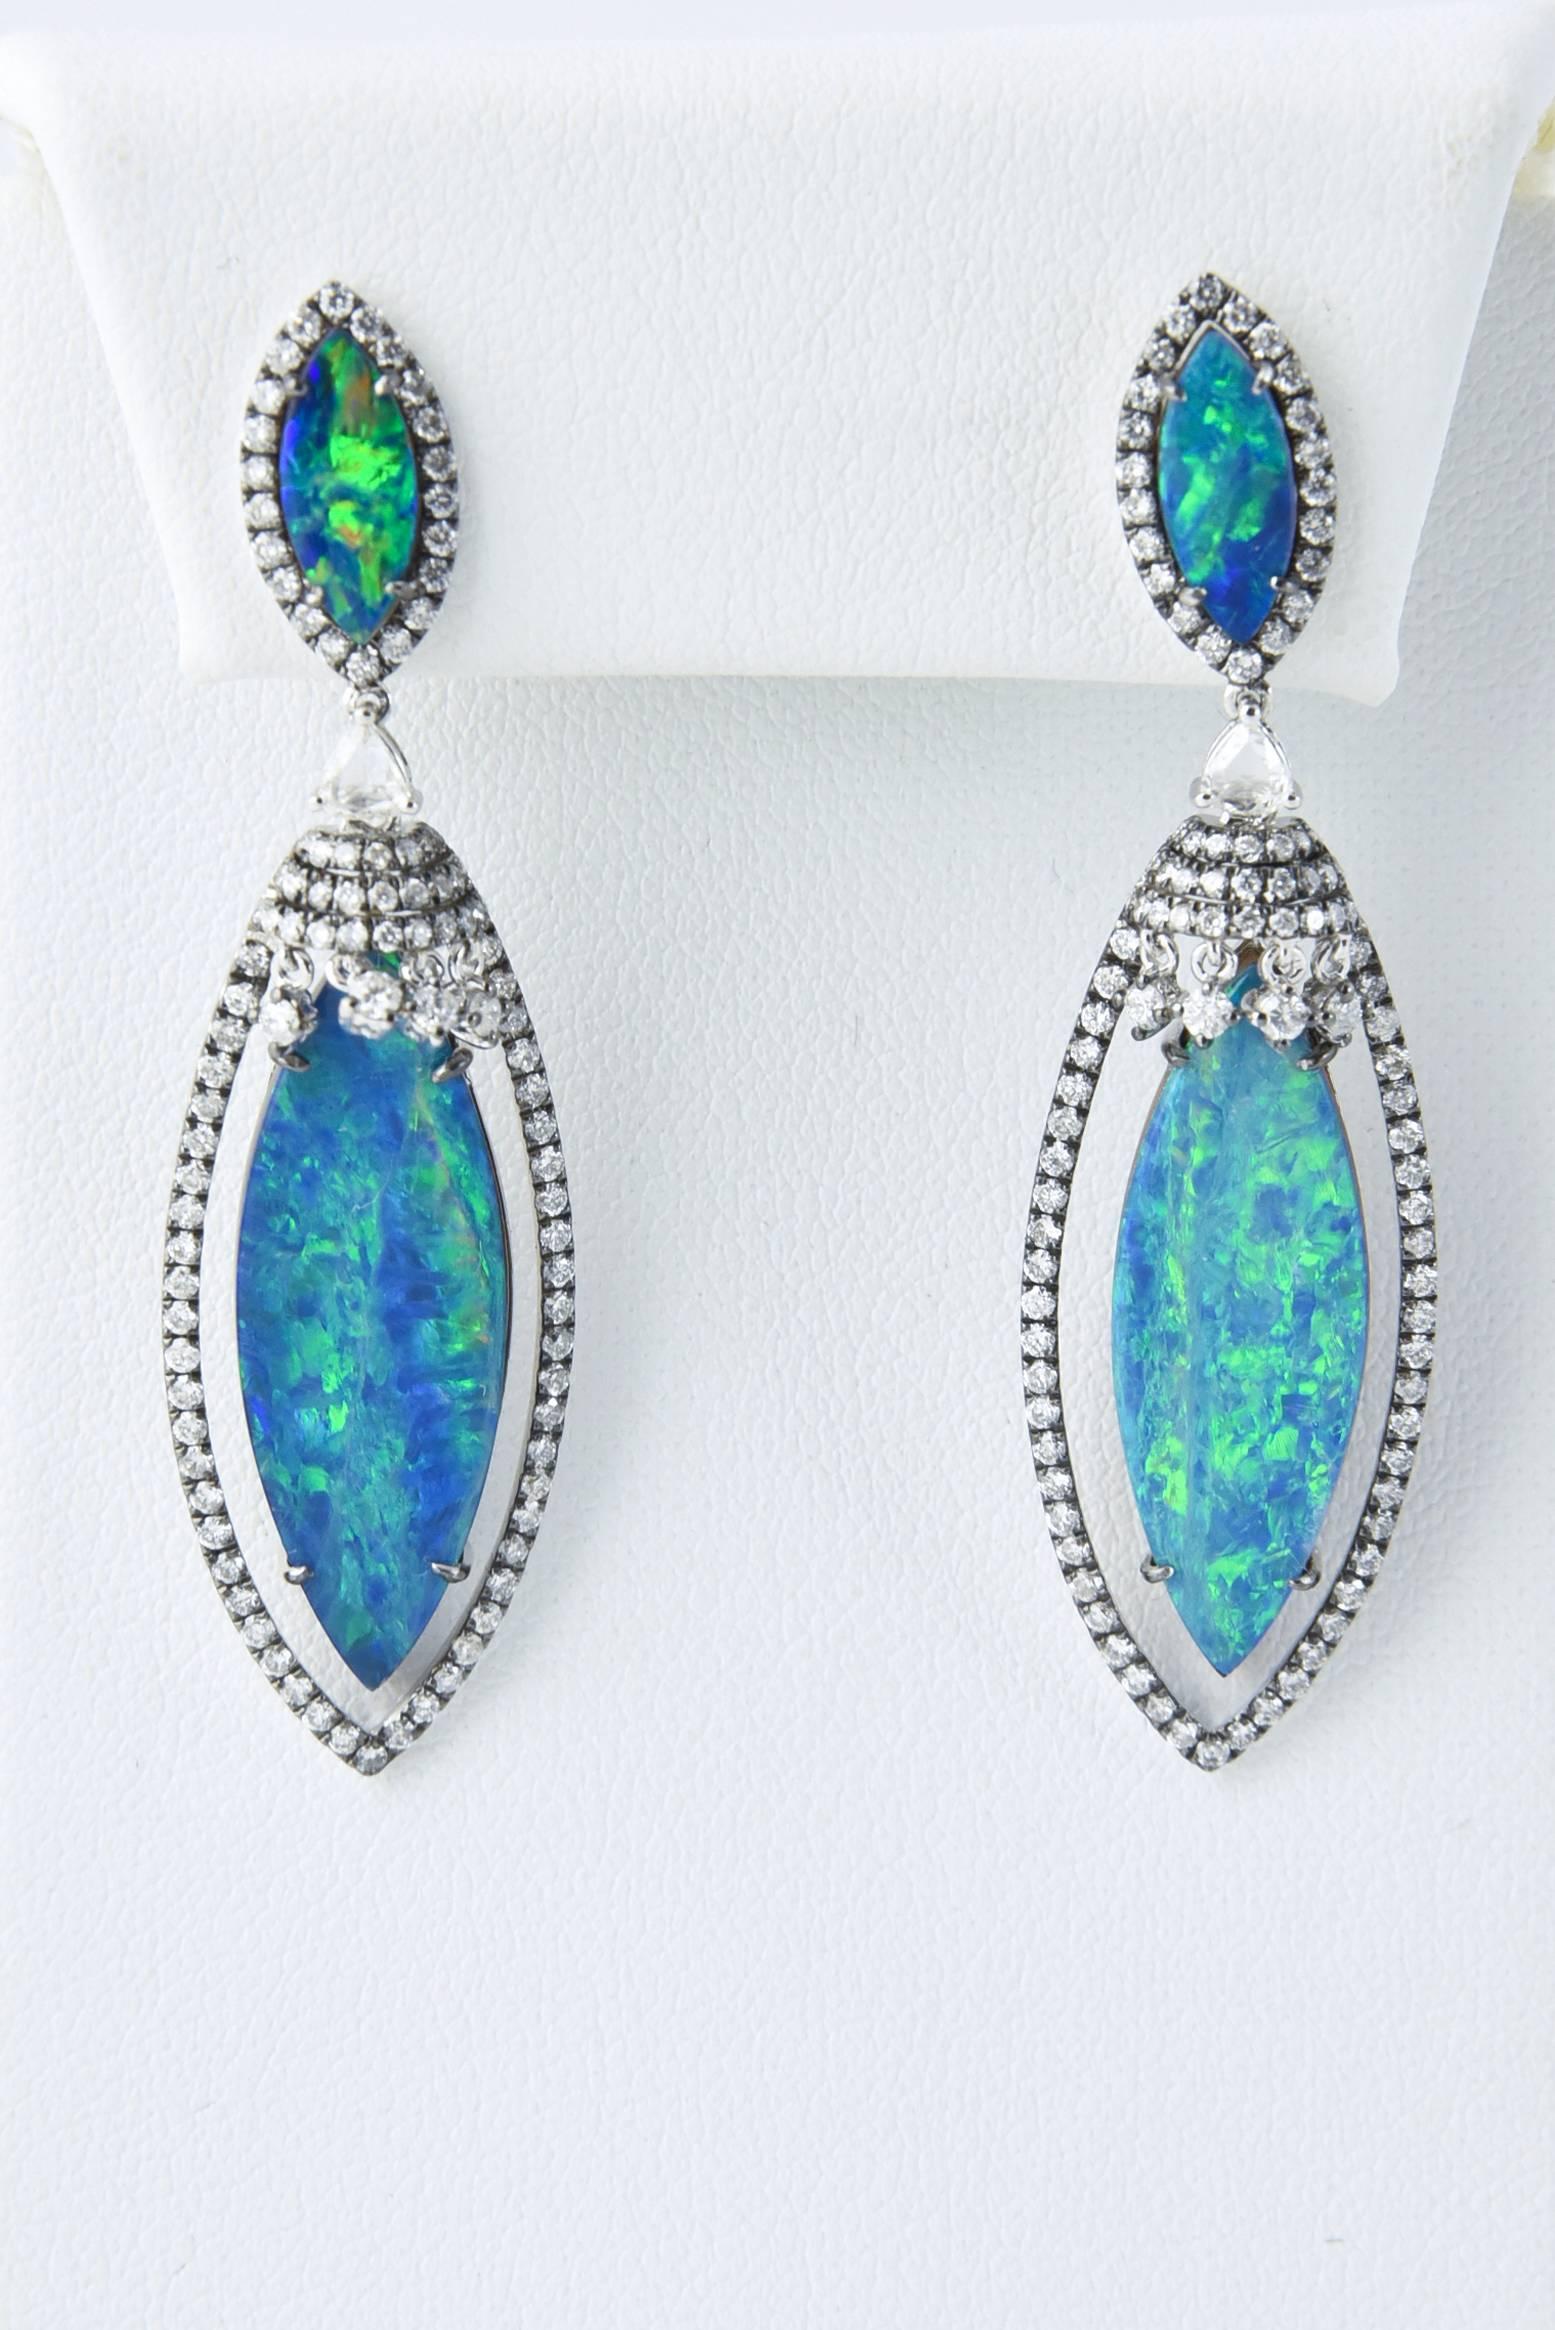 Stunning Well Matched Opal Doublet Earrings mounted in 18 karat white gold accented with 1.82 carats of diamonds.